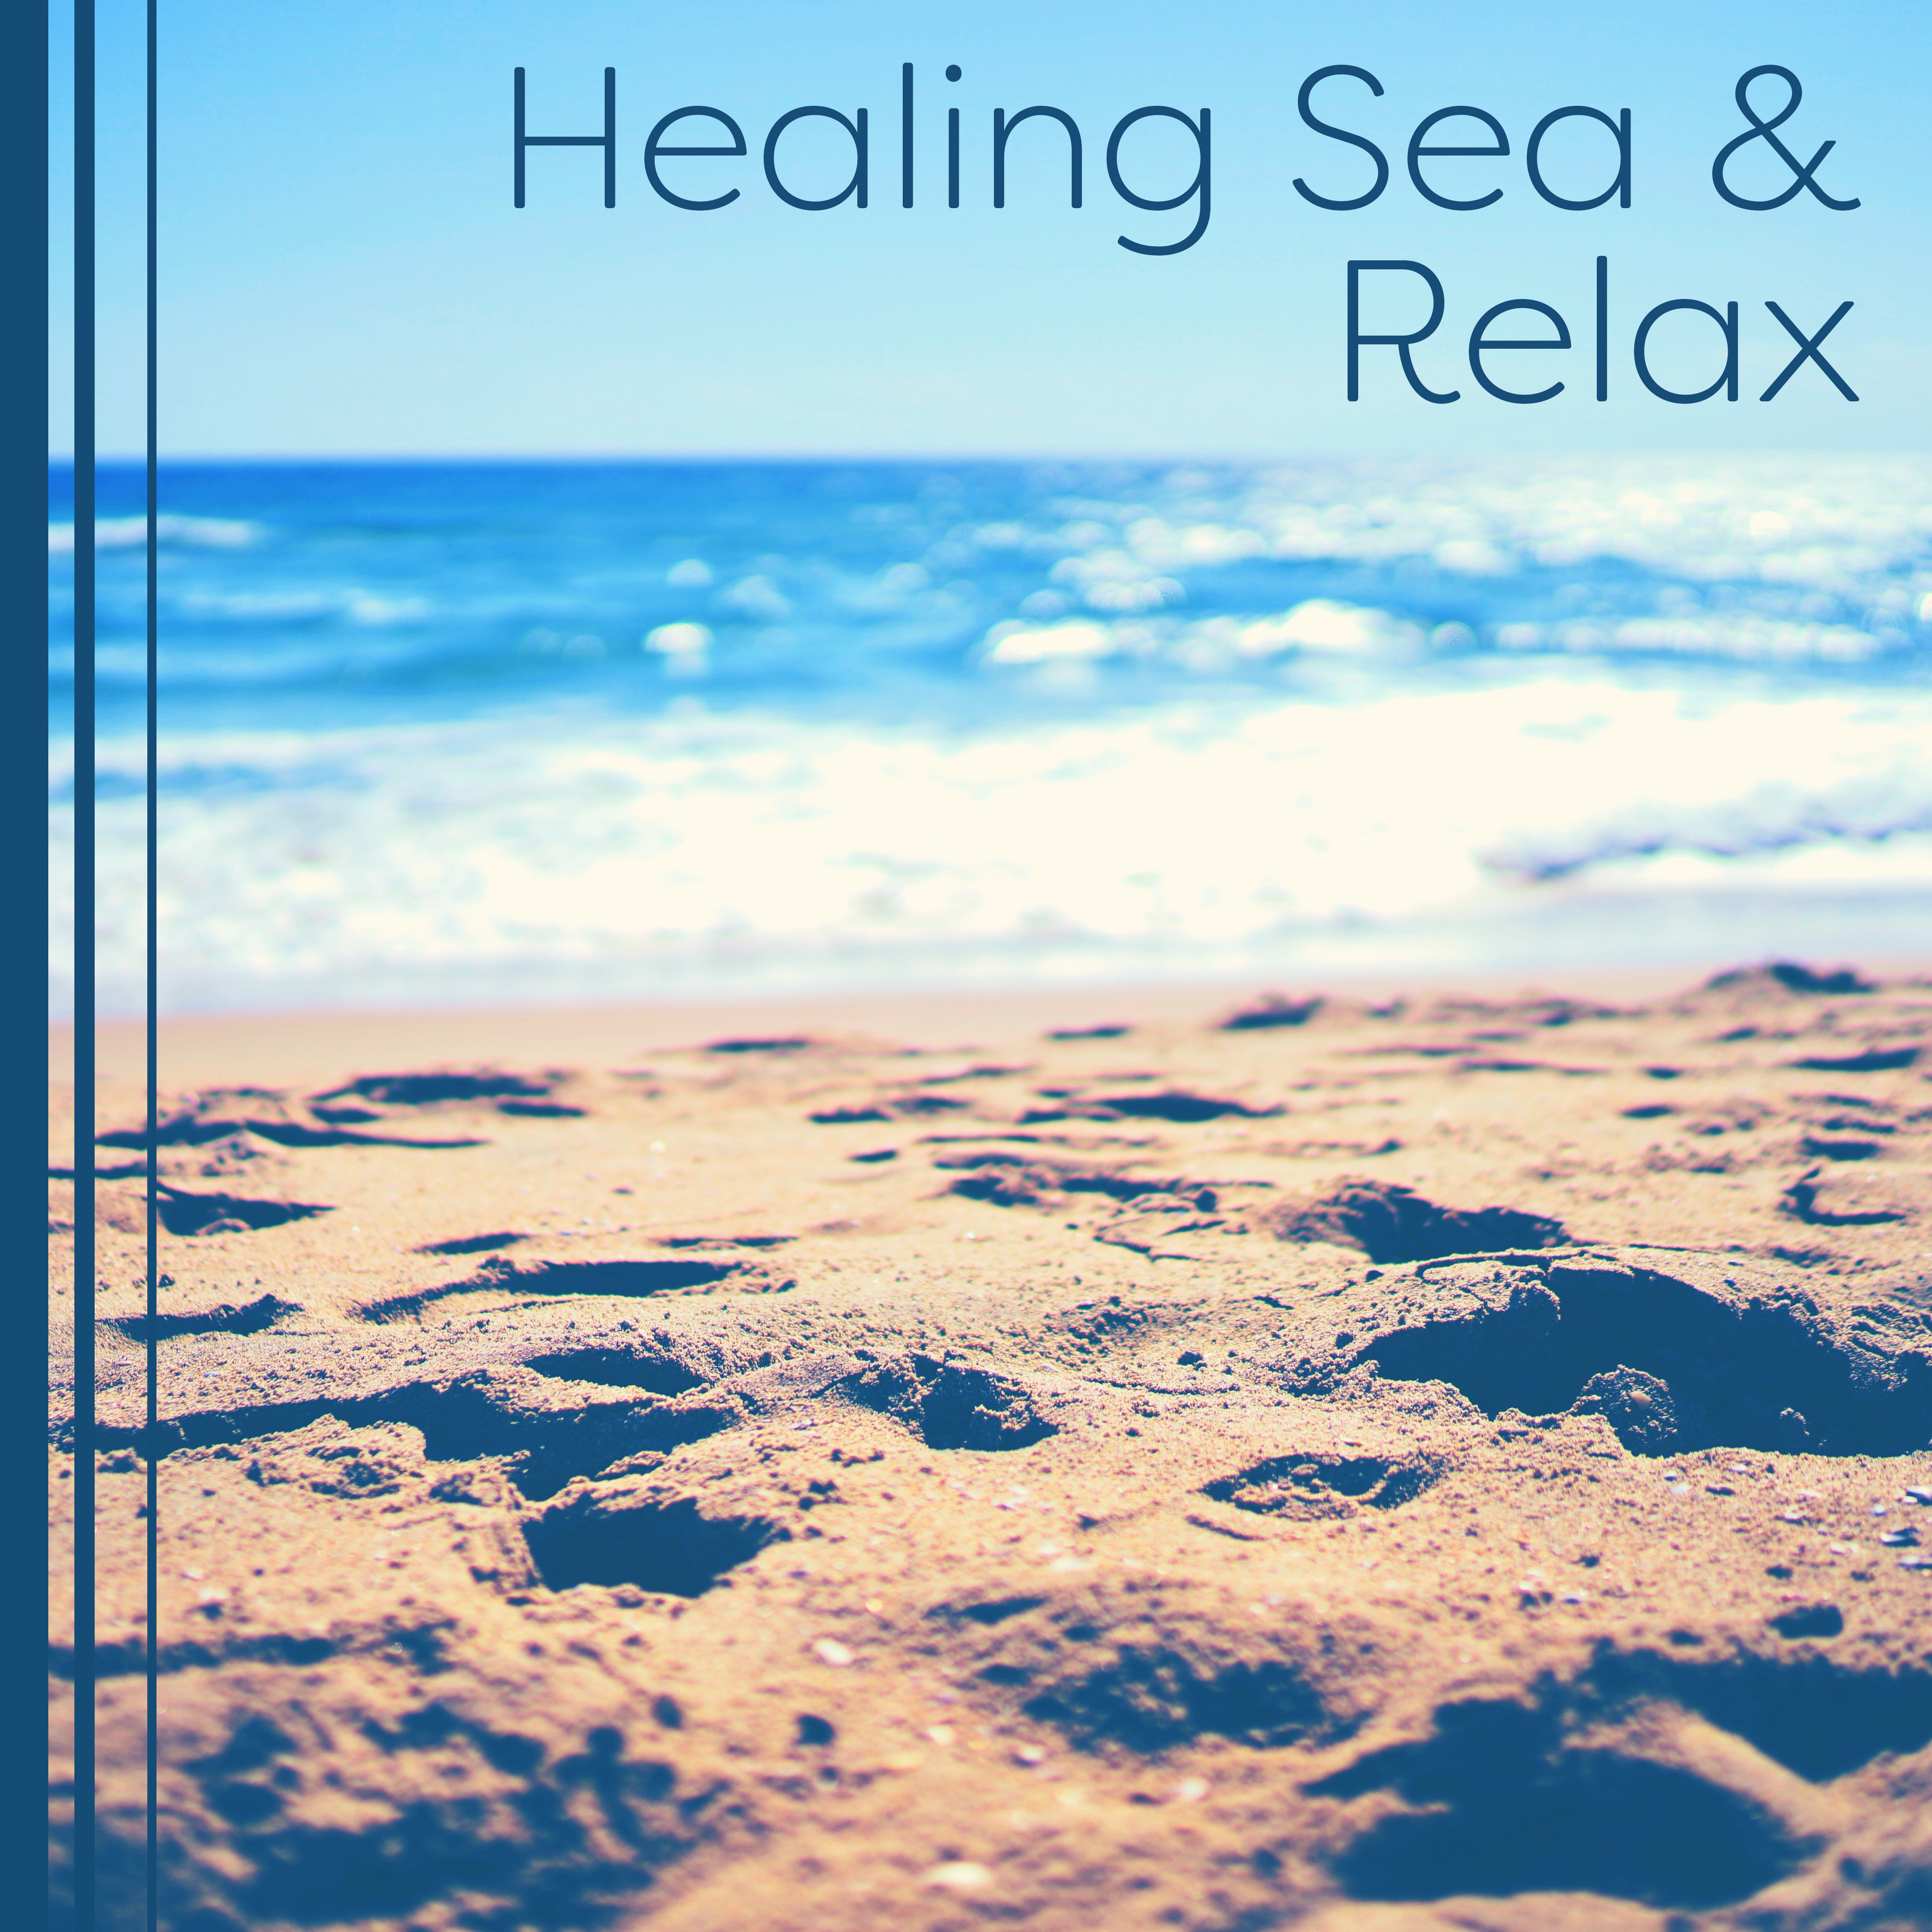 Healing Sea  Relax  Nature Sounds for Relaxation, Deep Relief, Tropical Waves, Soothing Water, Relaxed Mind